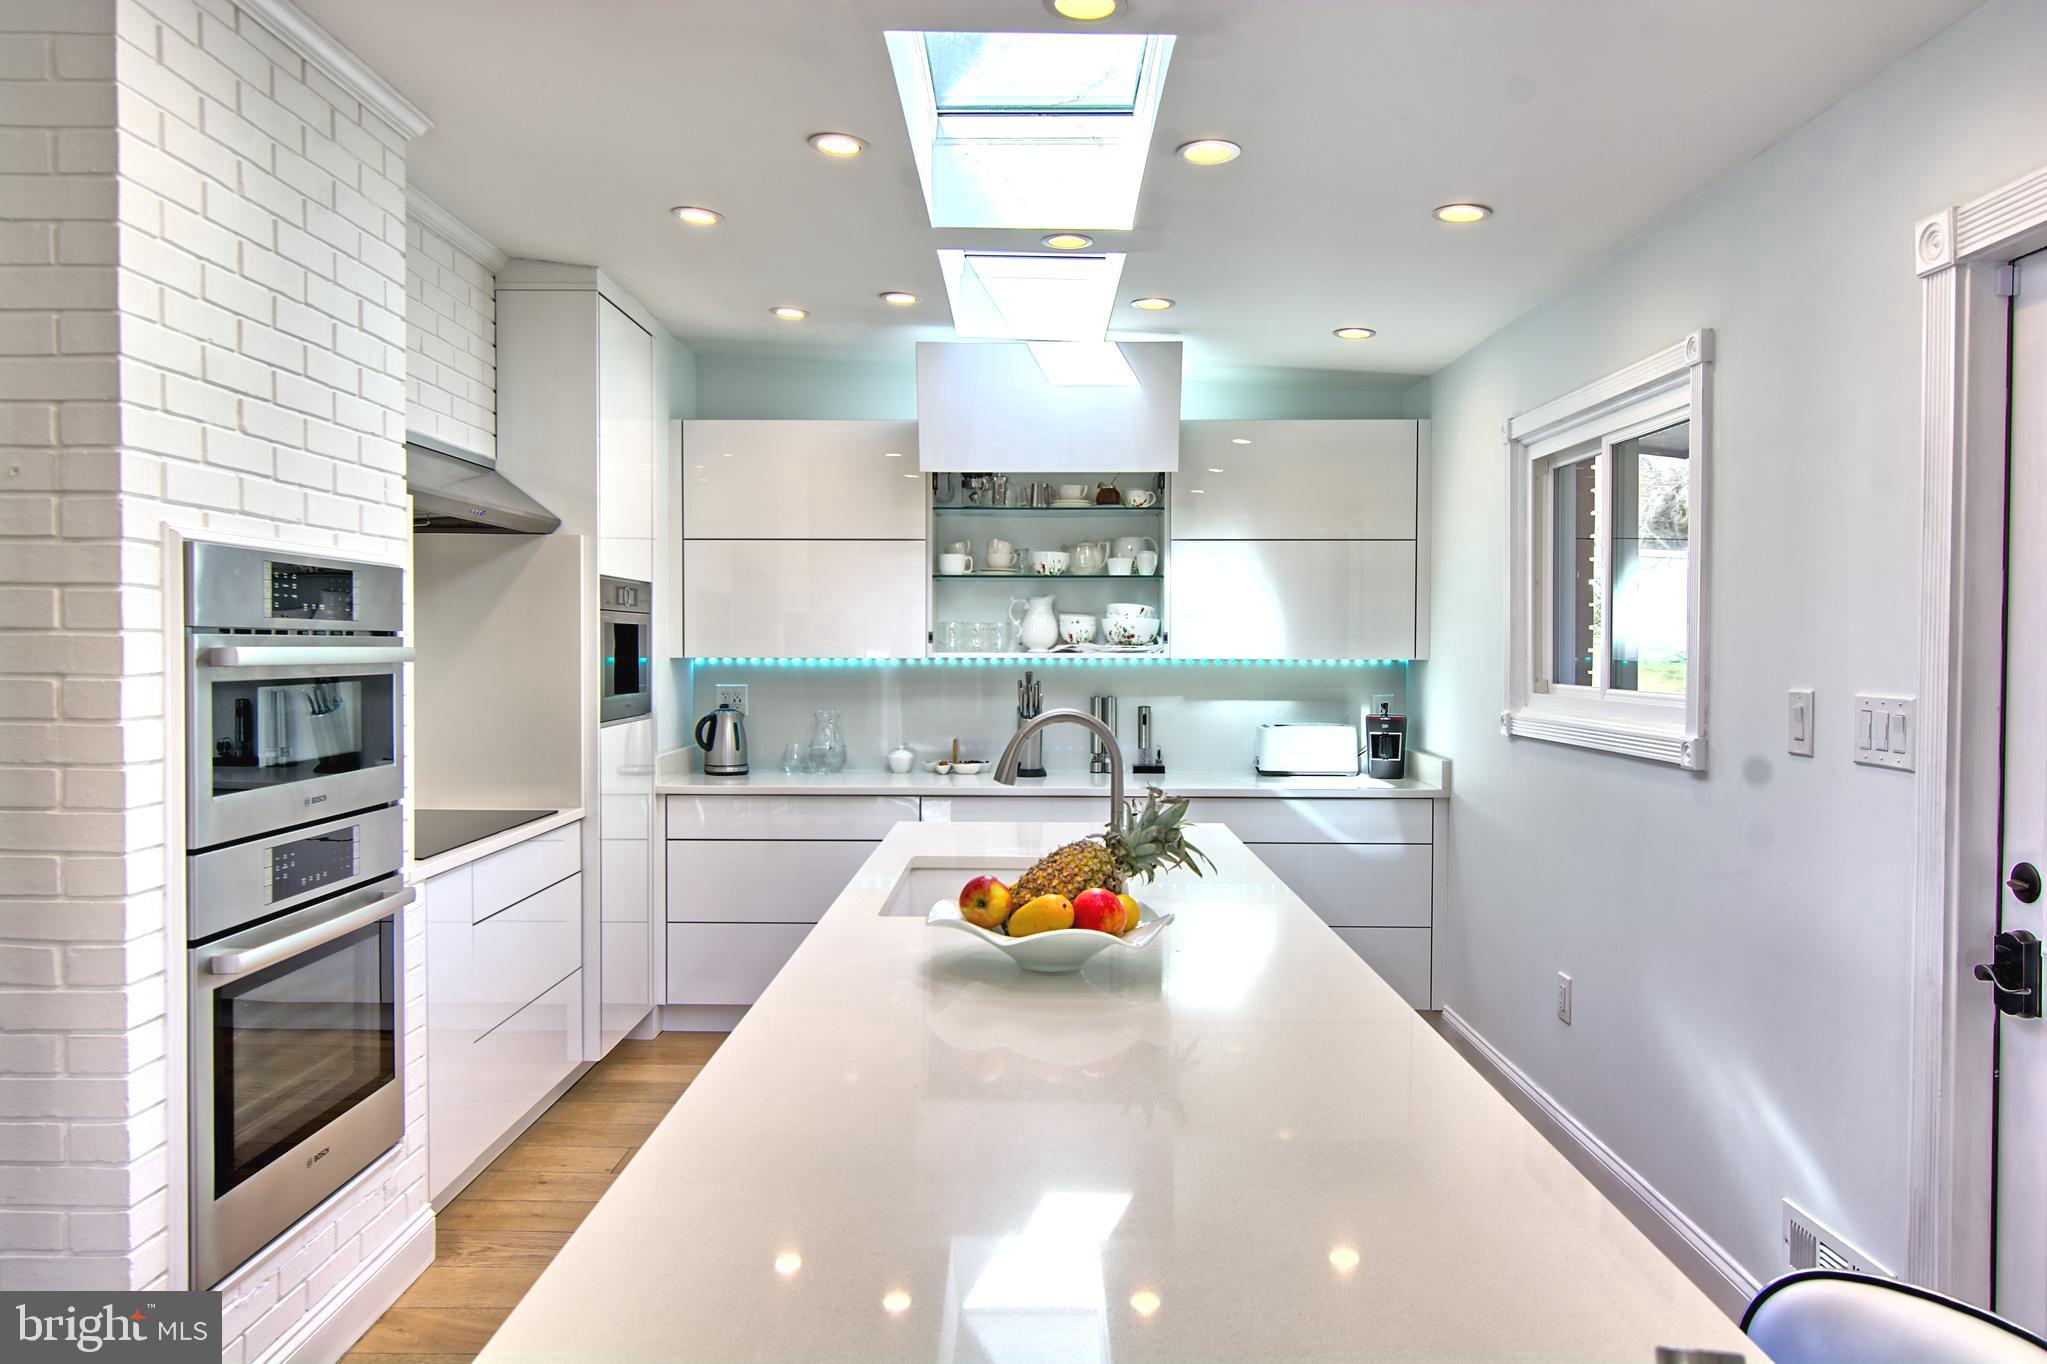 a large white kitchen with lots of counter space wooden floor and stainless steel appliances